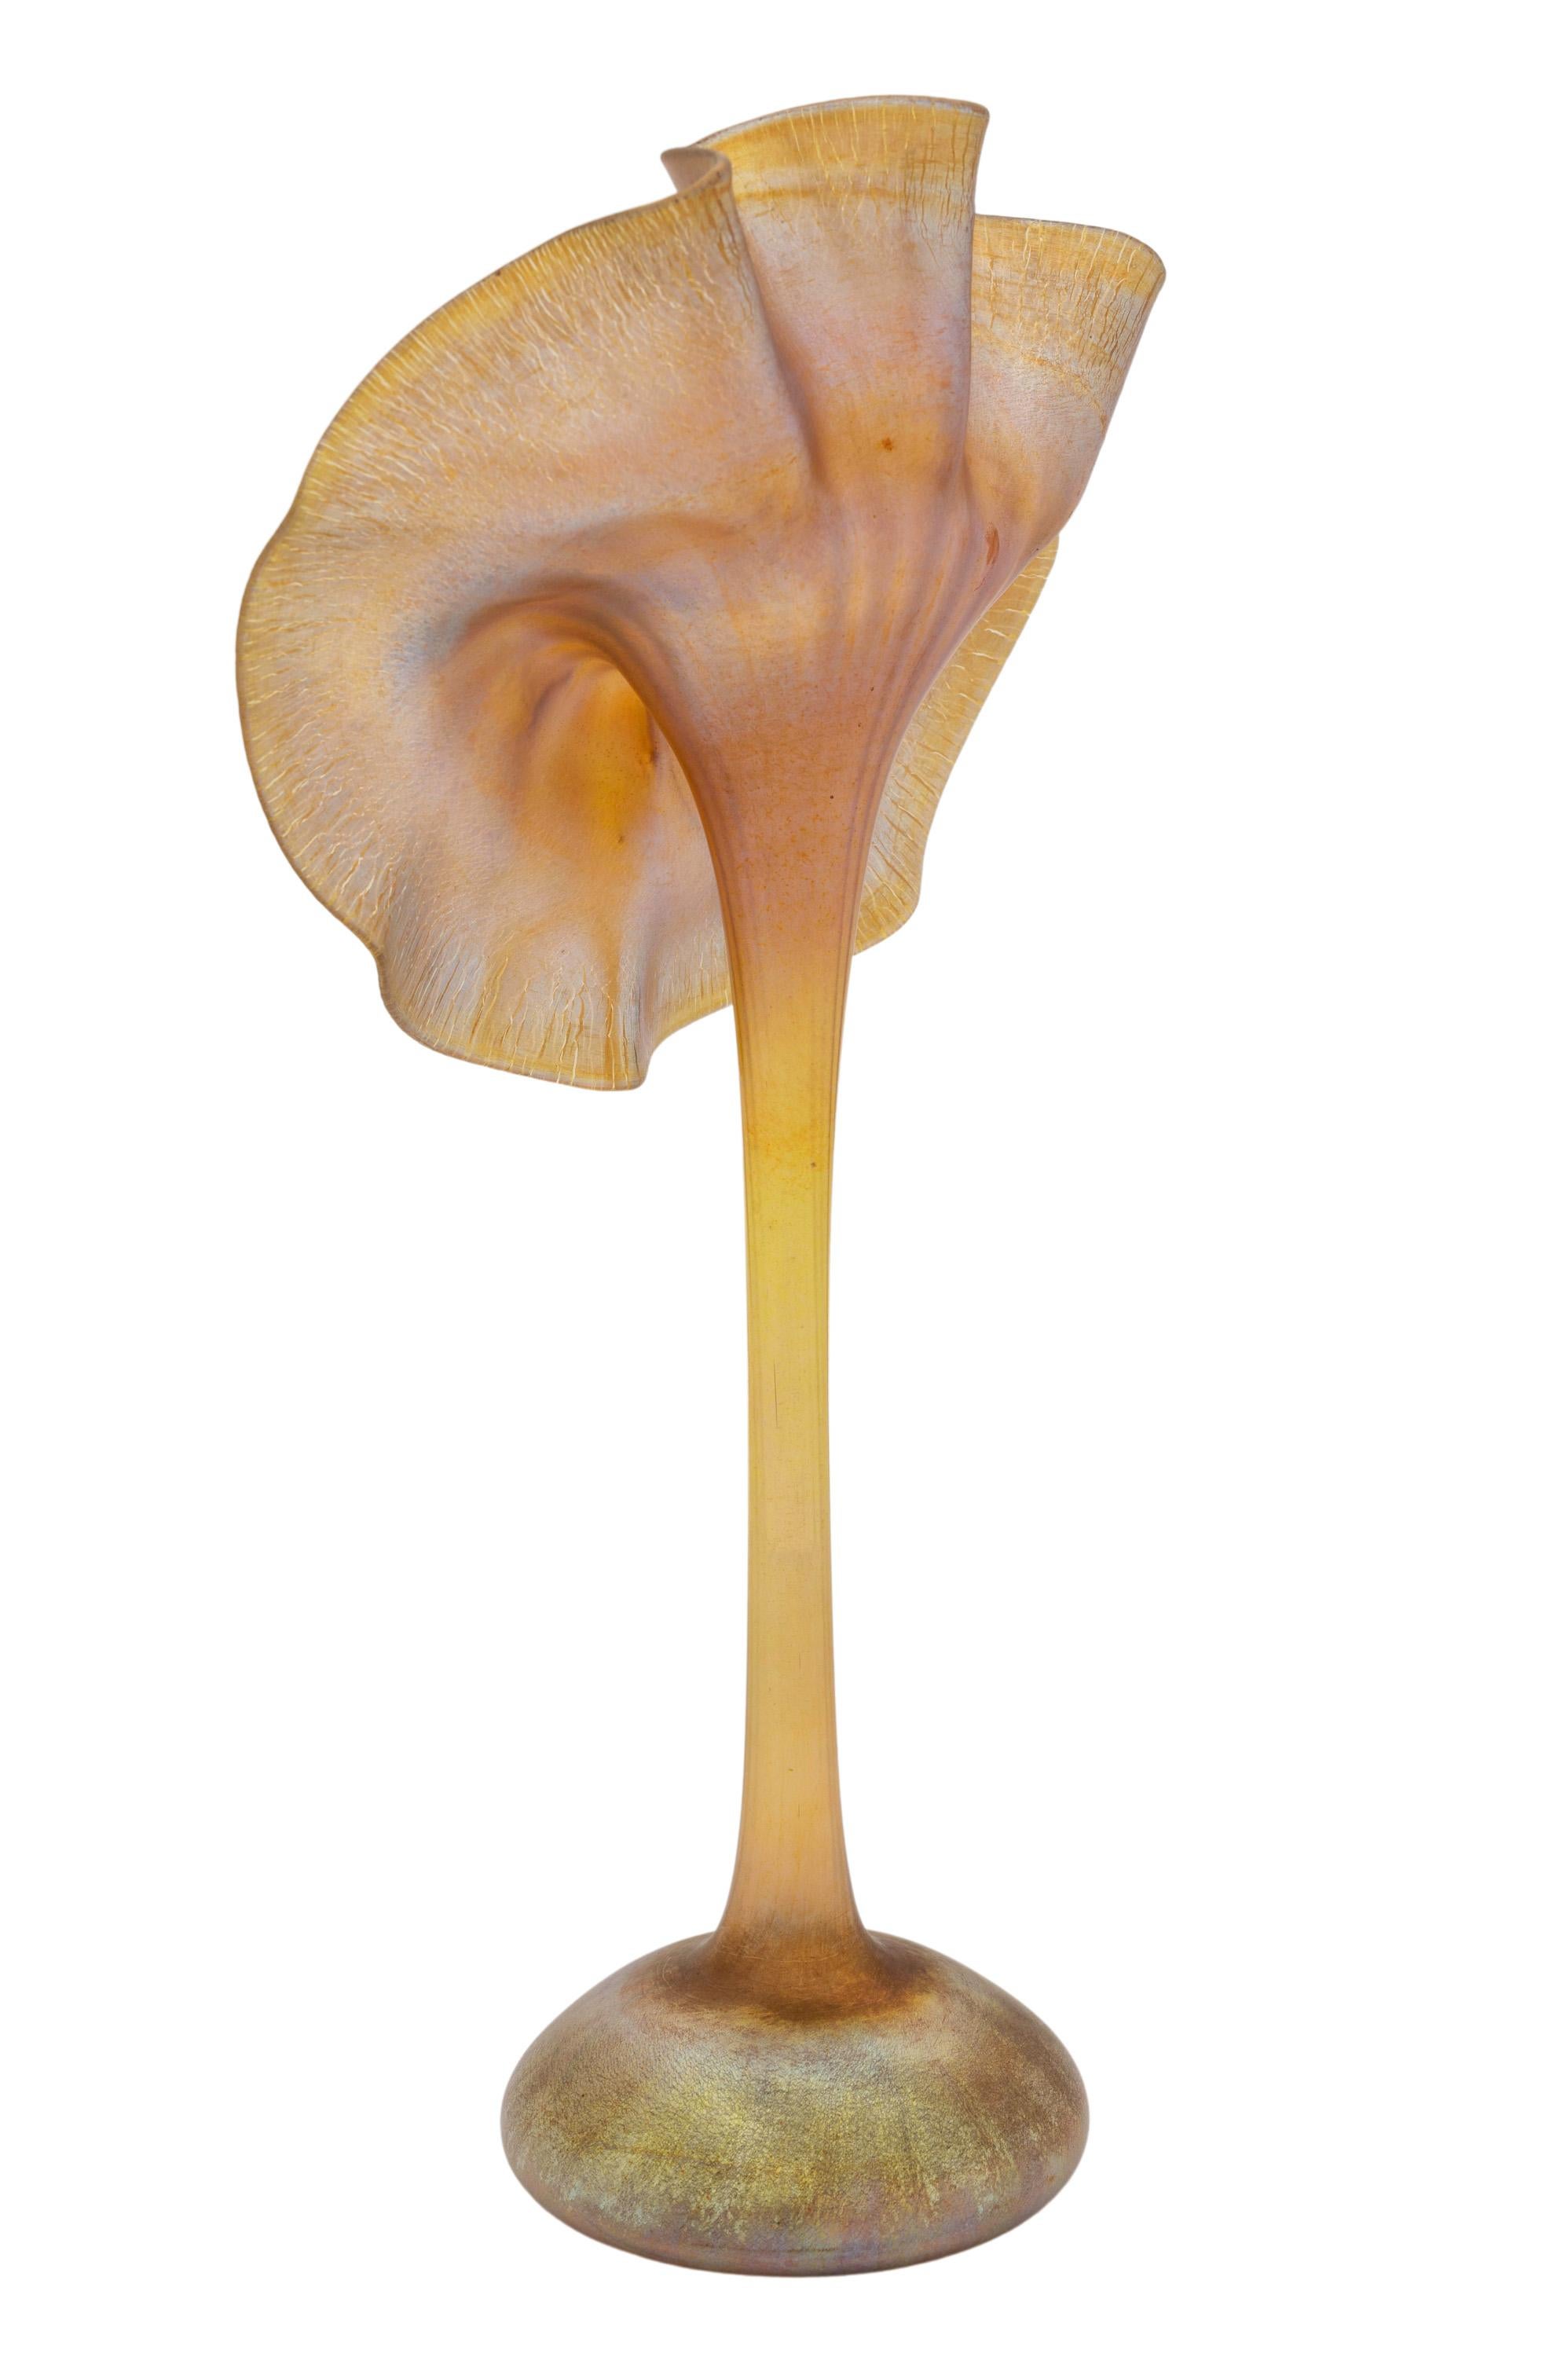 Jack-in-the-pulpit Vase Louis C. Tiffany New York Tiffany Studios 1906 Yellow  In Good Condition For Sale In Klosterneuburg, AT